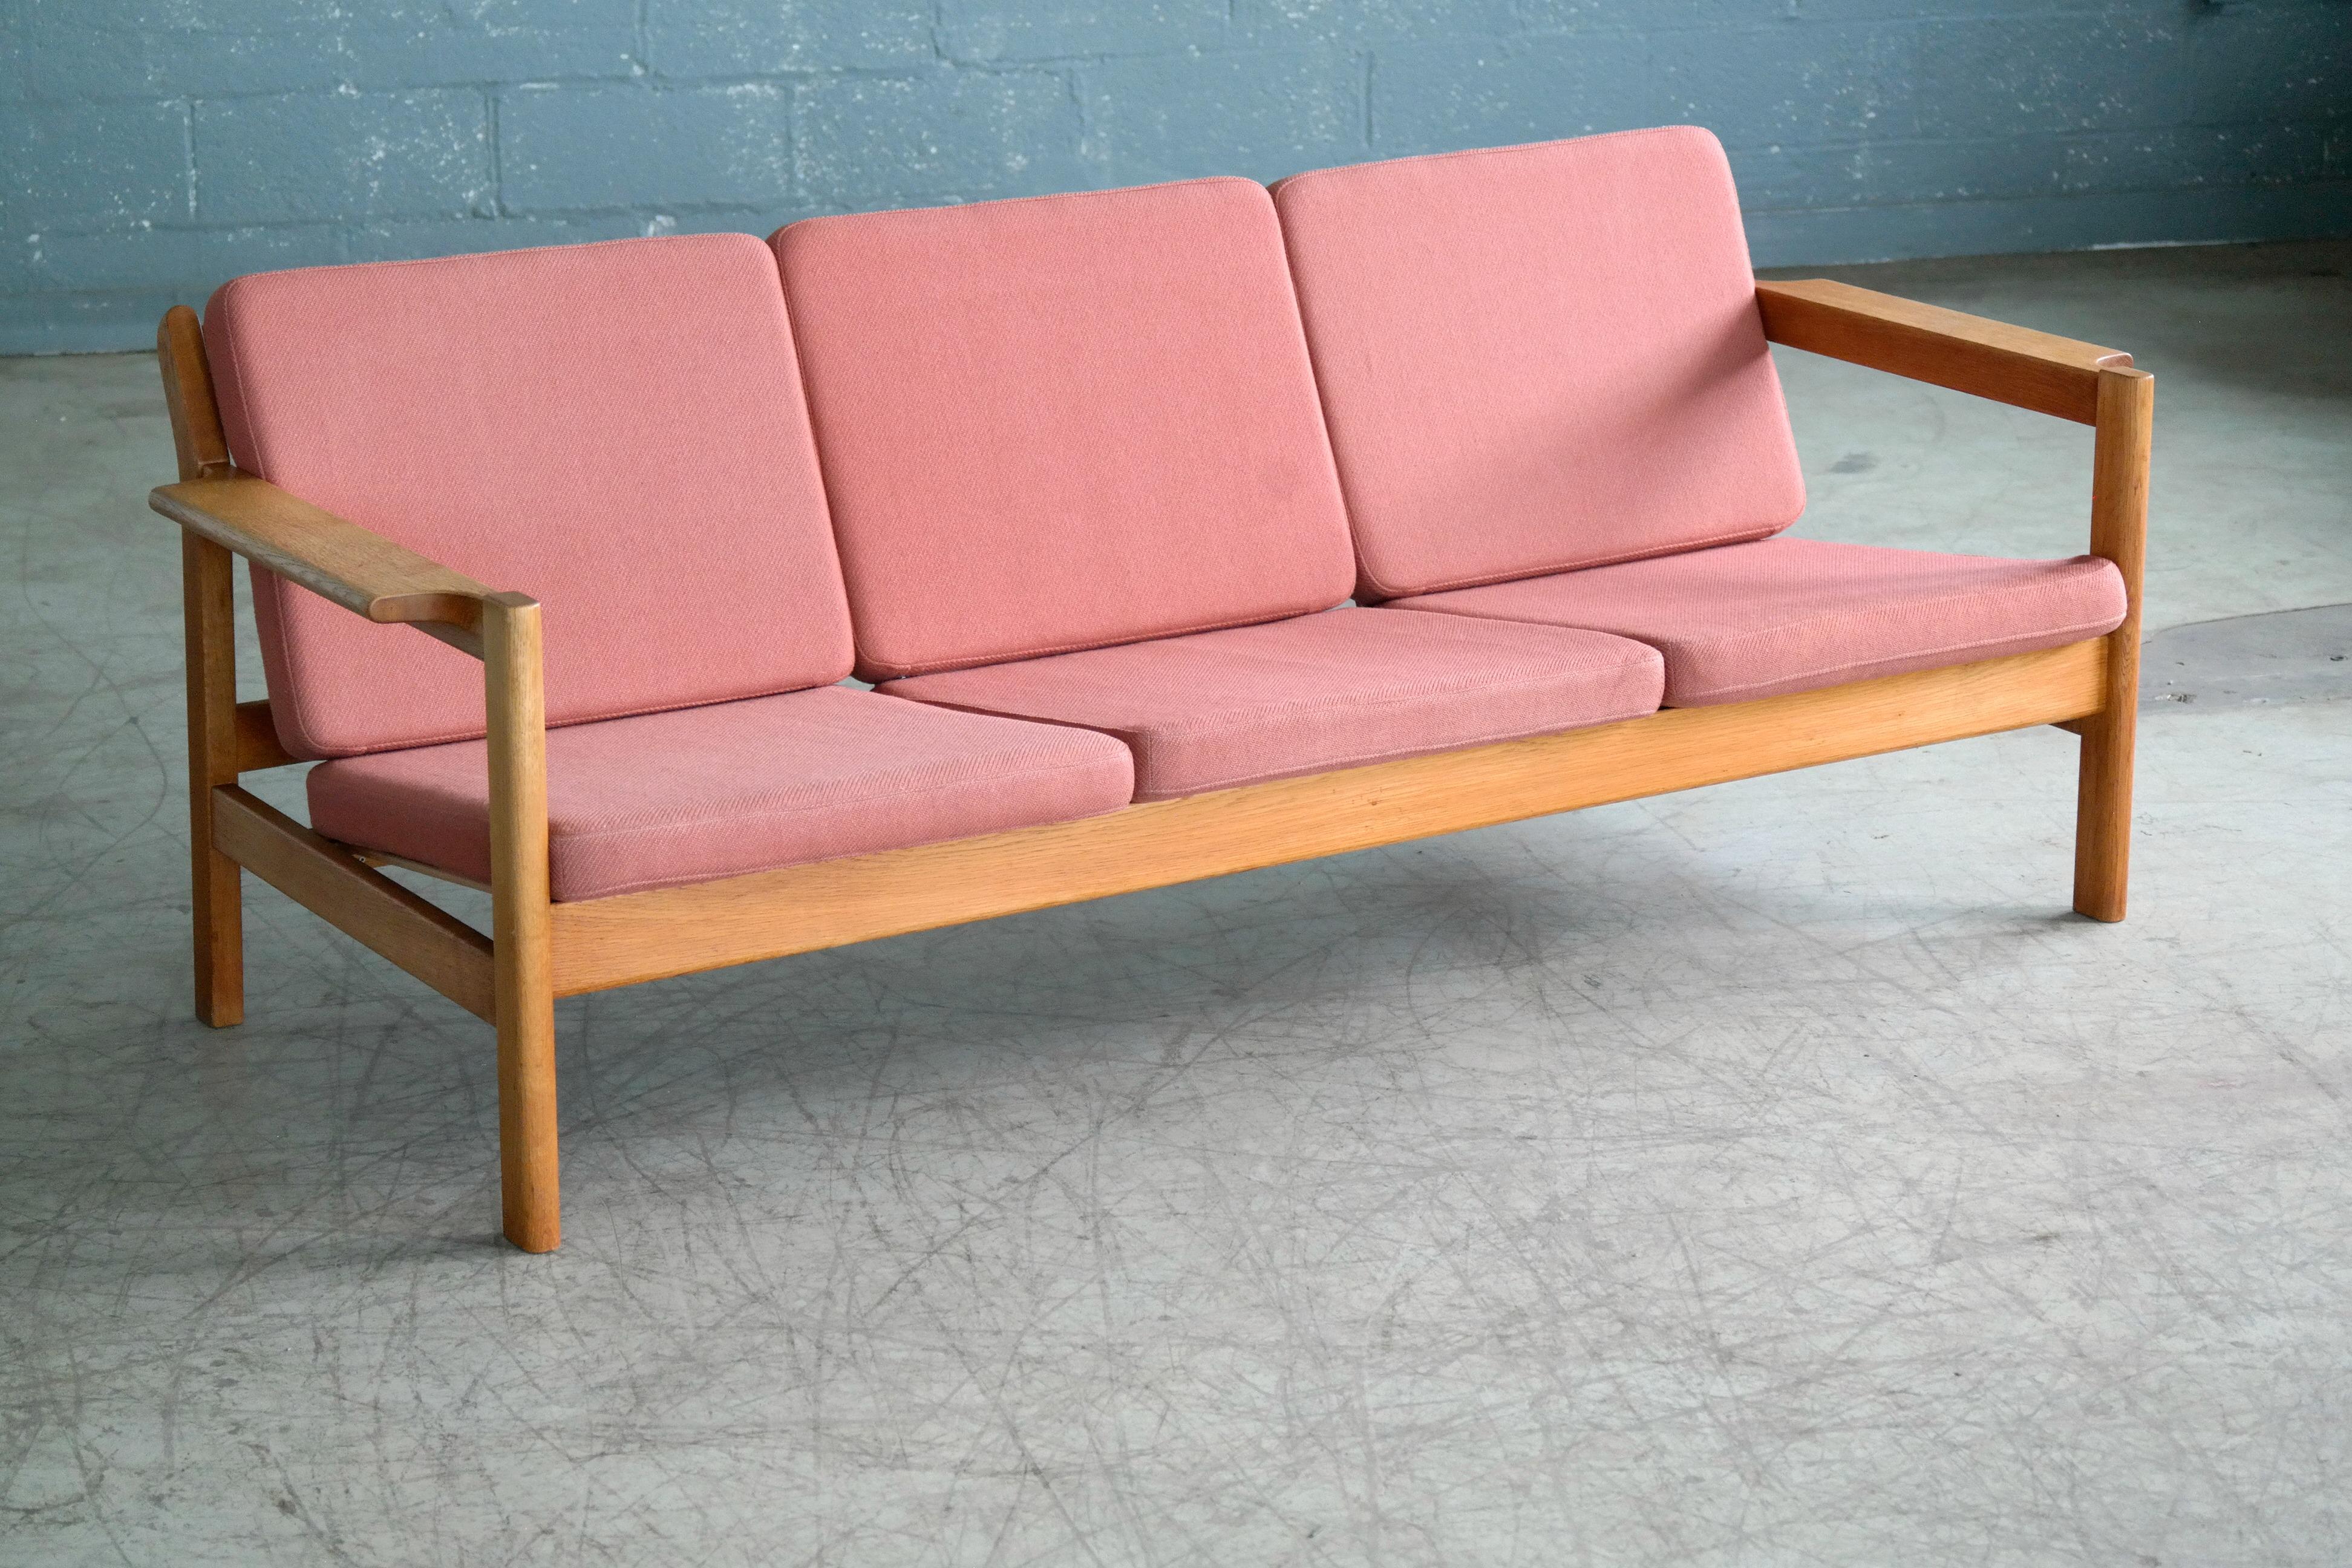 Classic Danish design by iconic Designer Borge Mogensen - designed in the 1960s and made from solid oak by Fredericia (labeled on the frame). 
We love the elegant angles of the sofa combined the slim cushions still covered in their original pale